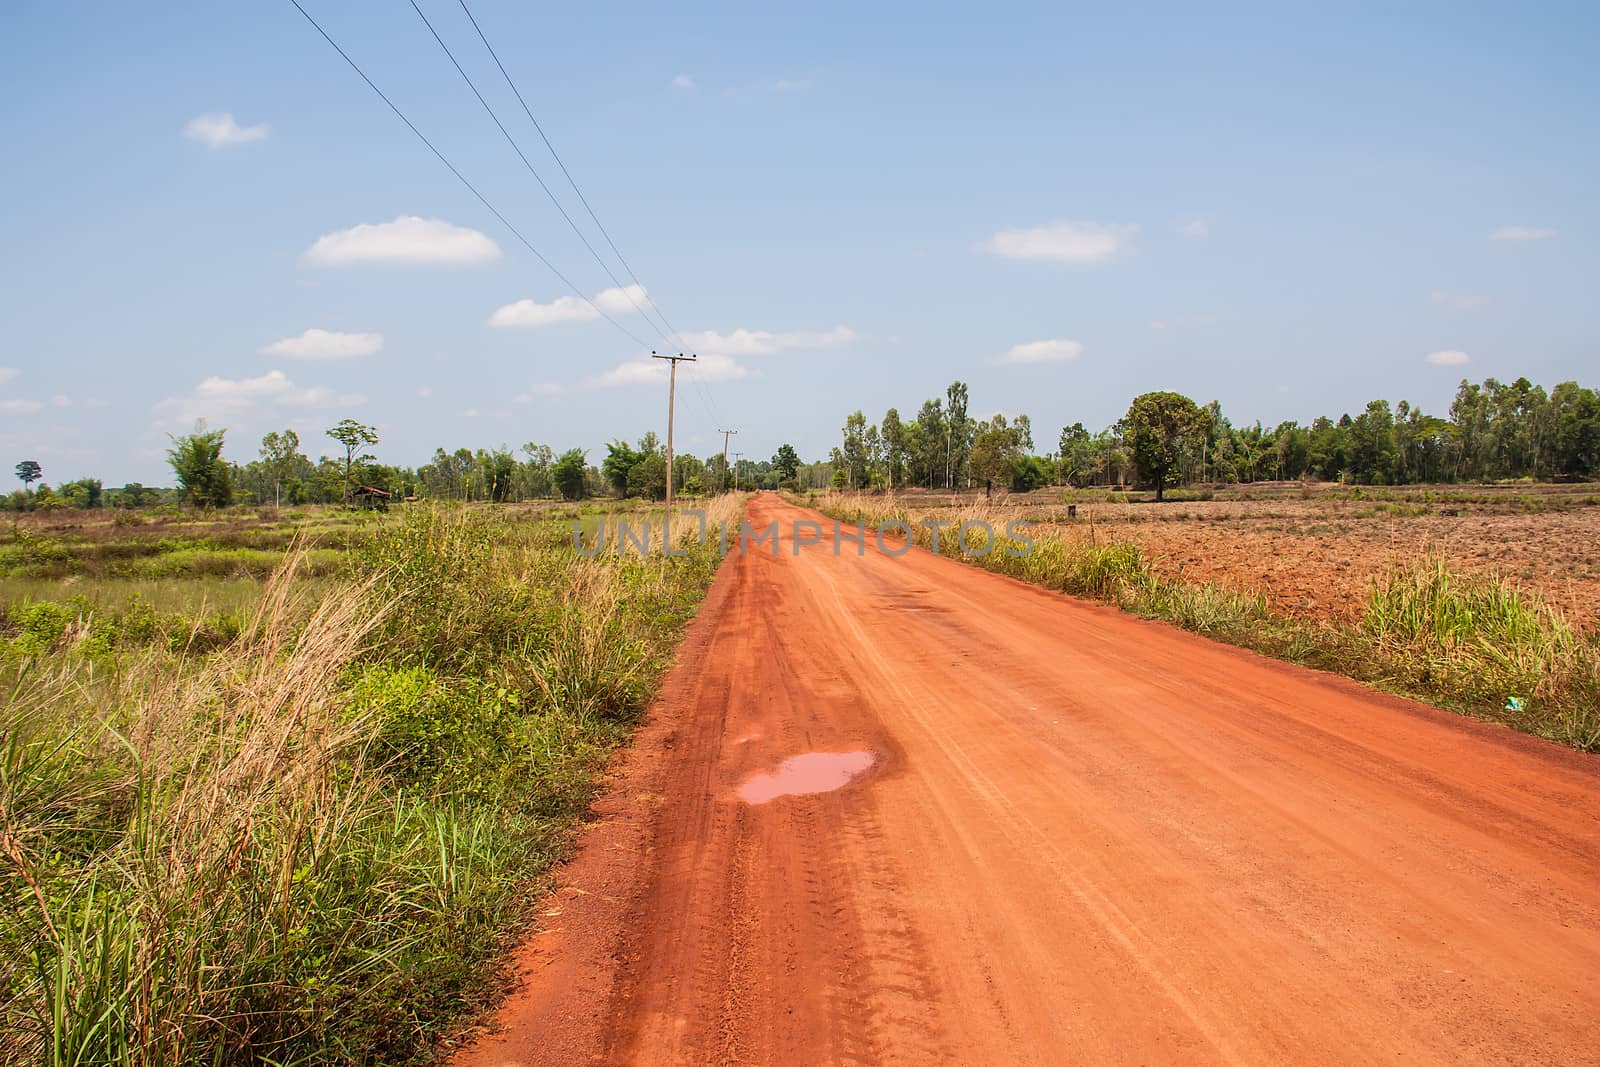 Red Road in the countryside in Thailand